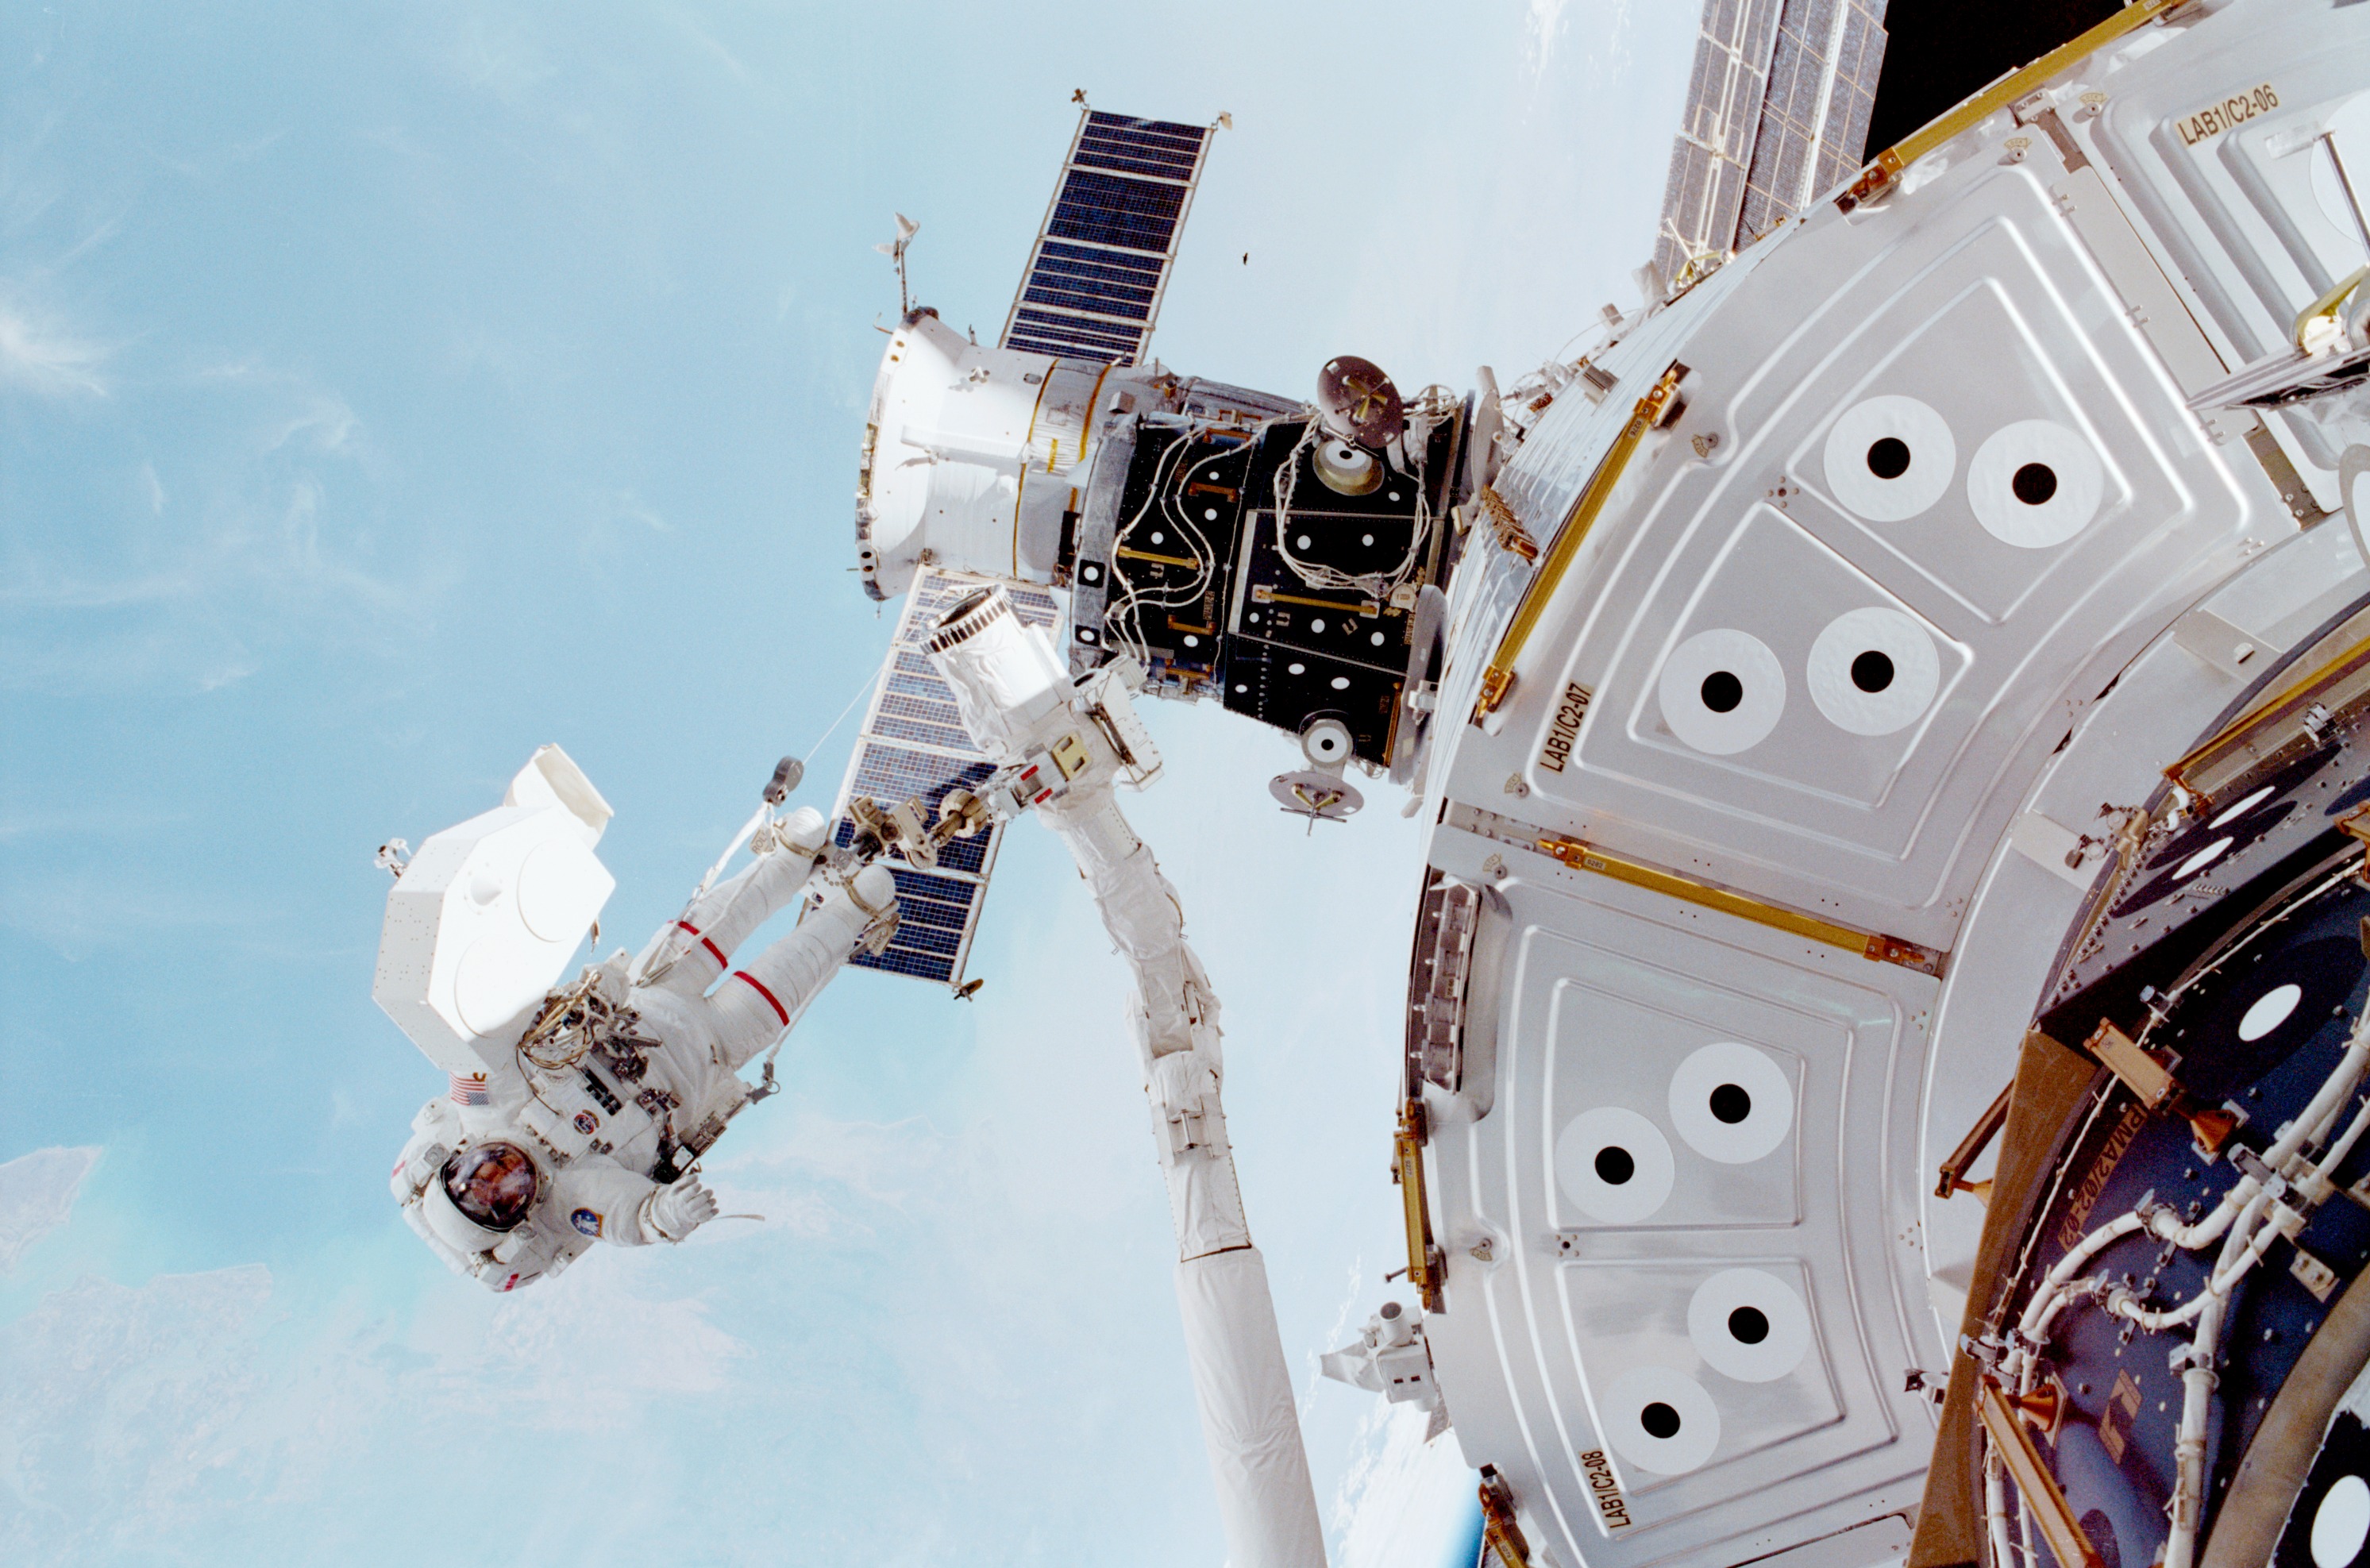 Jim Voss is pictured at the end of Discovery's Remote Manipulator System (RMS) mechanical arm, during the longest EVA ever undertaken, in March 2001. Photo Credit: NASA